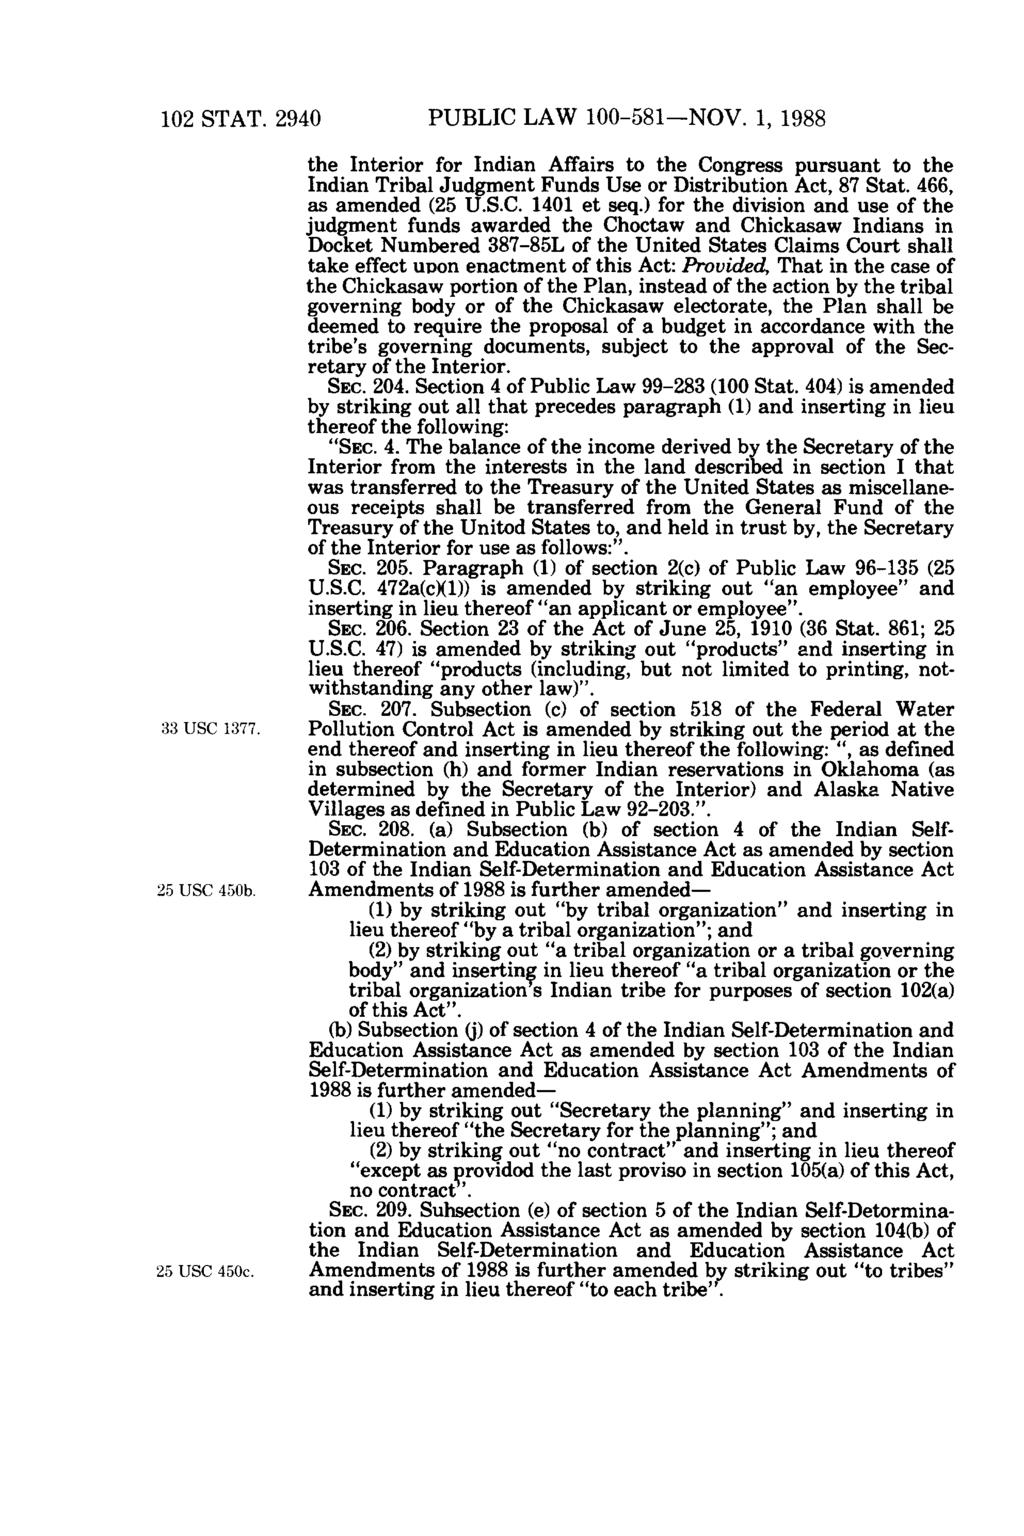 102 STAT. 2940 PUBLIC LAW 100-581-NOV. 1, 1988 the Interior for Indian Affairs to the Congress pursuant to the Indian Tribal Judgment Funds Use or Distribution Act, 87 Stat. 466, as amended (25 U.S.C. 1401 et seq.